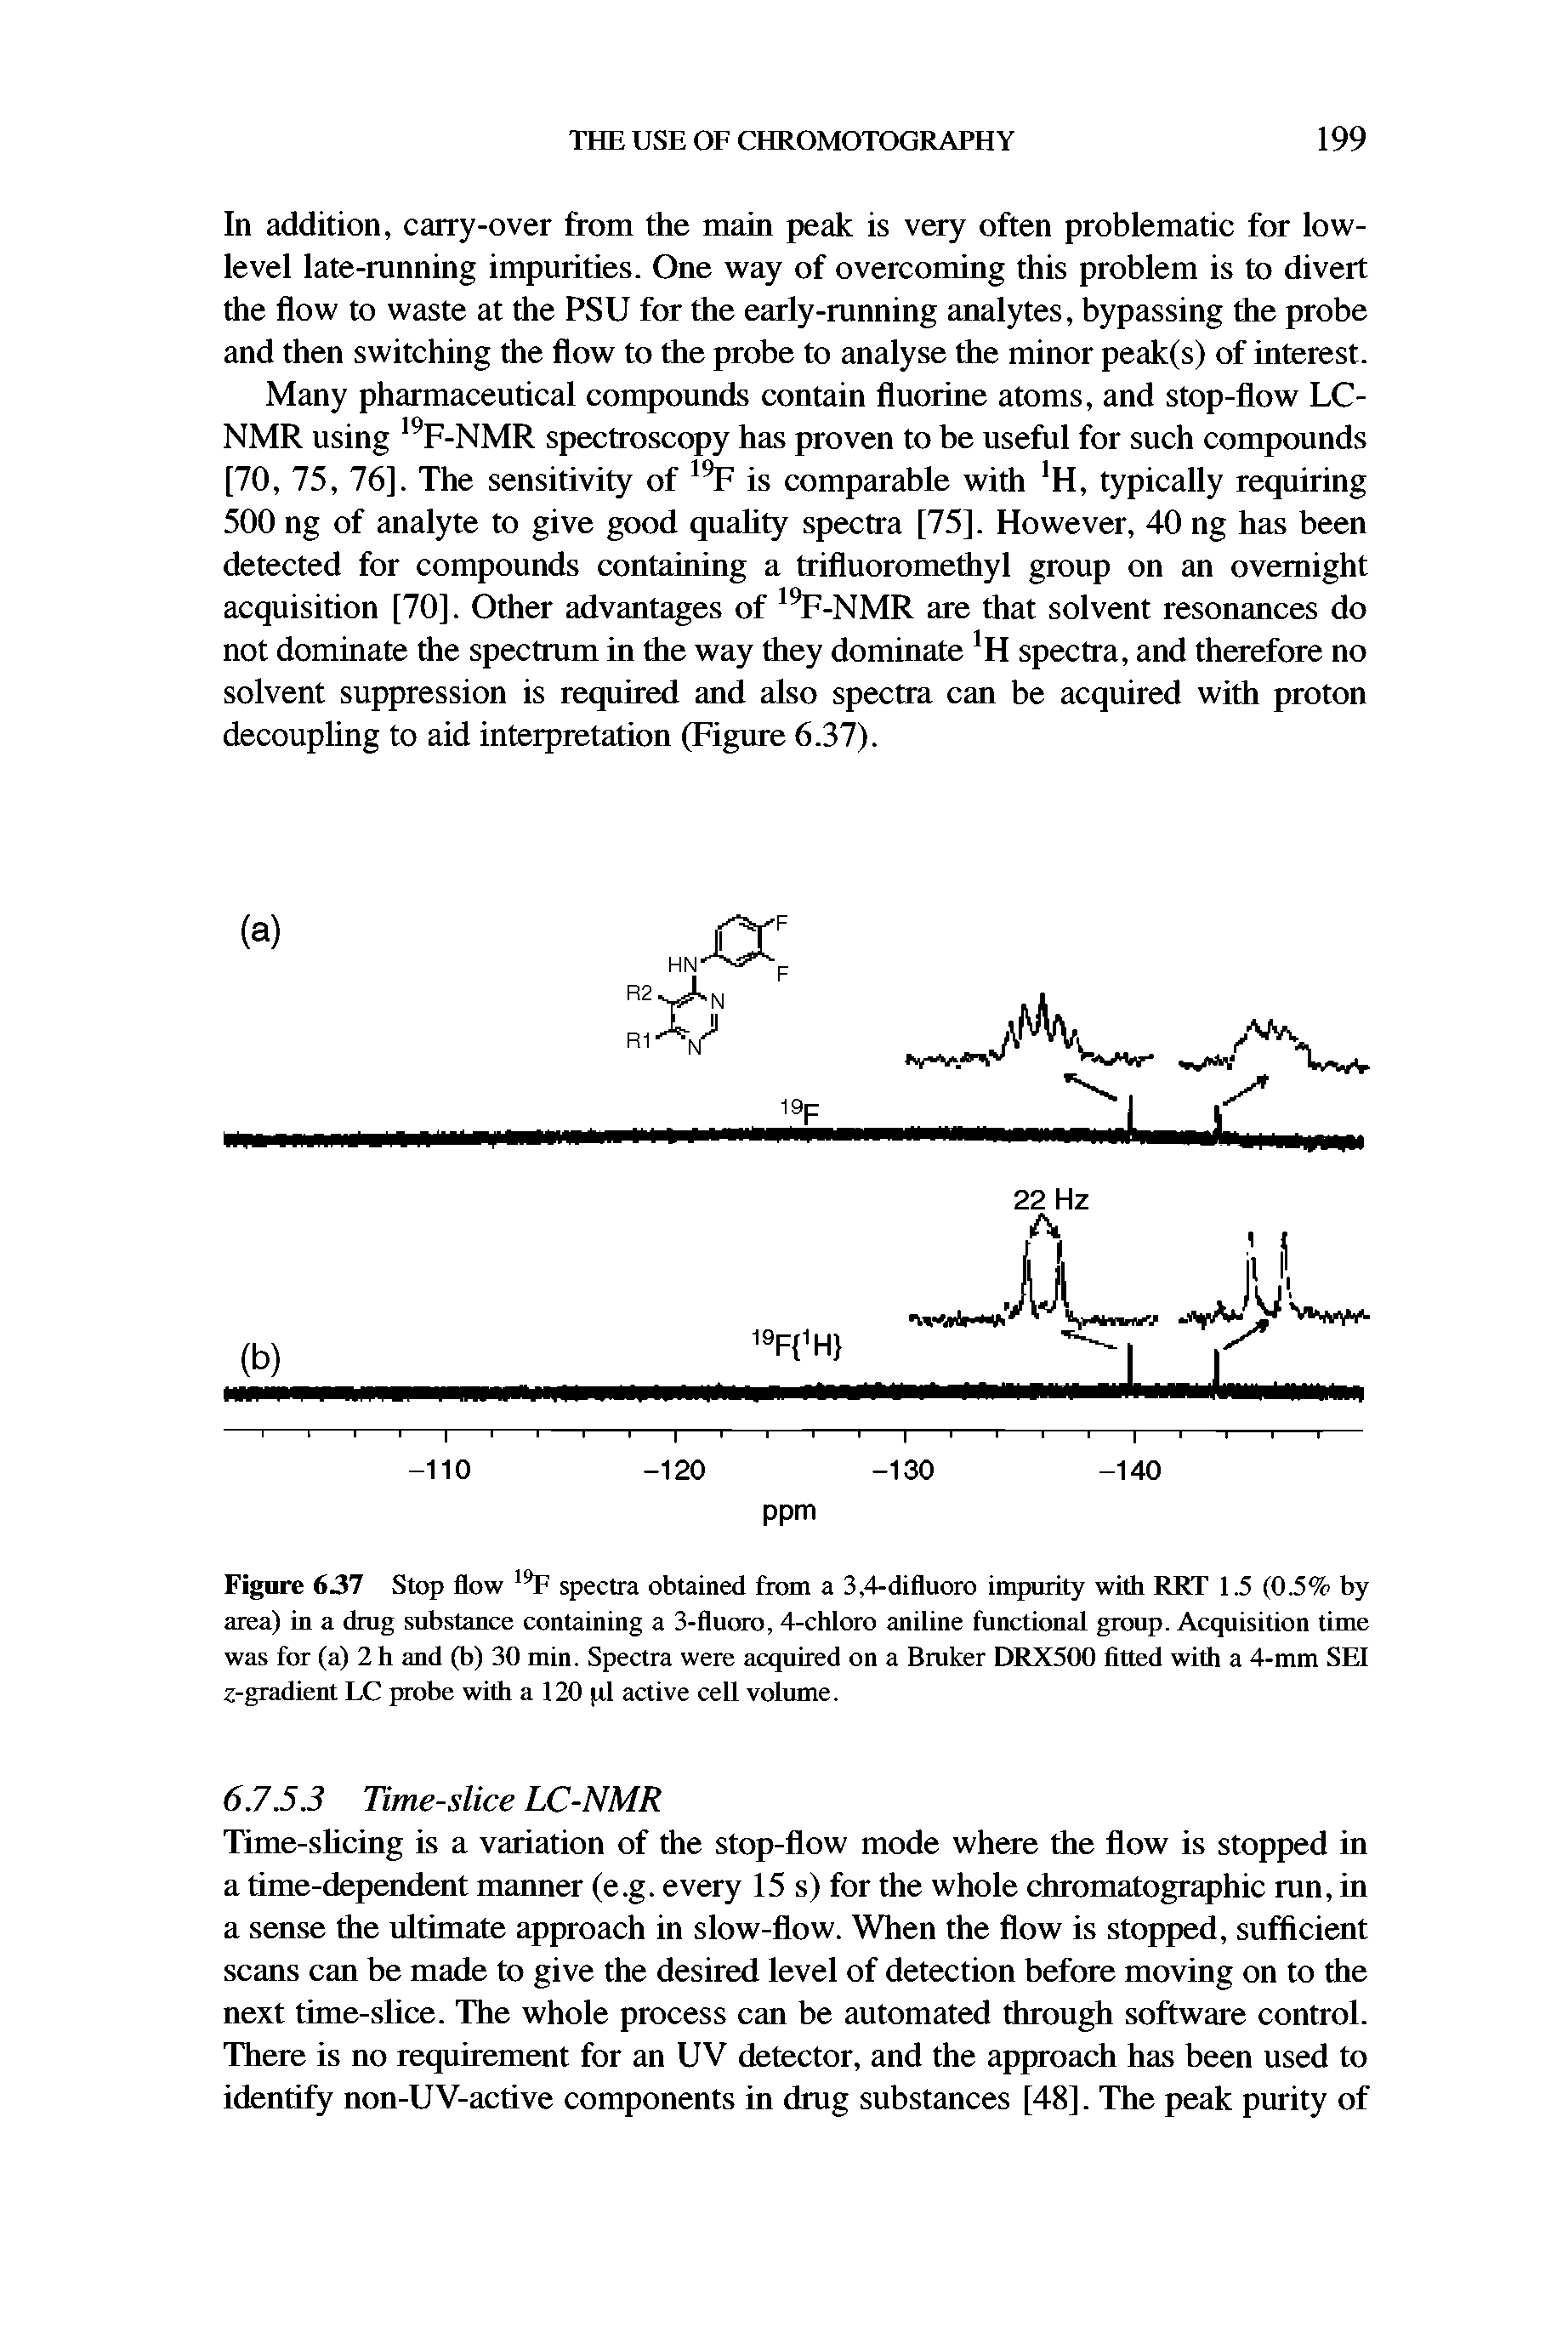 Figure 637 Stop flow spectra obtained from a 3,4-difluoro impurity with RRT 1.5 (0.5% by area) in a drug substance containing a 3-fluoro, 4-chloro aniline functional group. Acquisition time was for (a) 2 h and (b) 30 min. Spectra were acquired on a Bruker DRX500 fitted with a 4-mm SEI z-gradient EC probe with a 120 pi active cell volume.